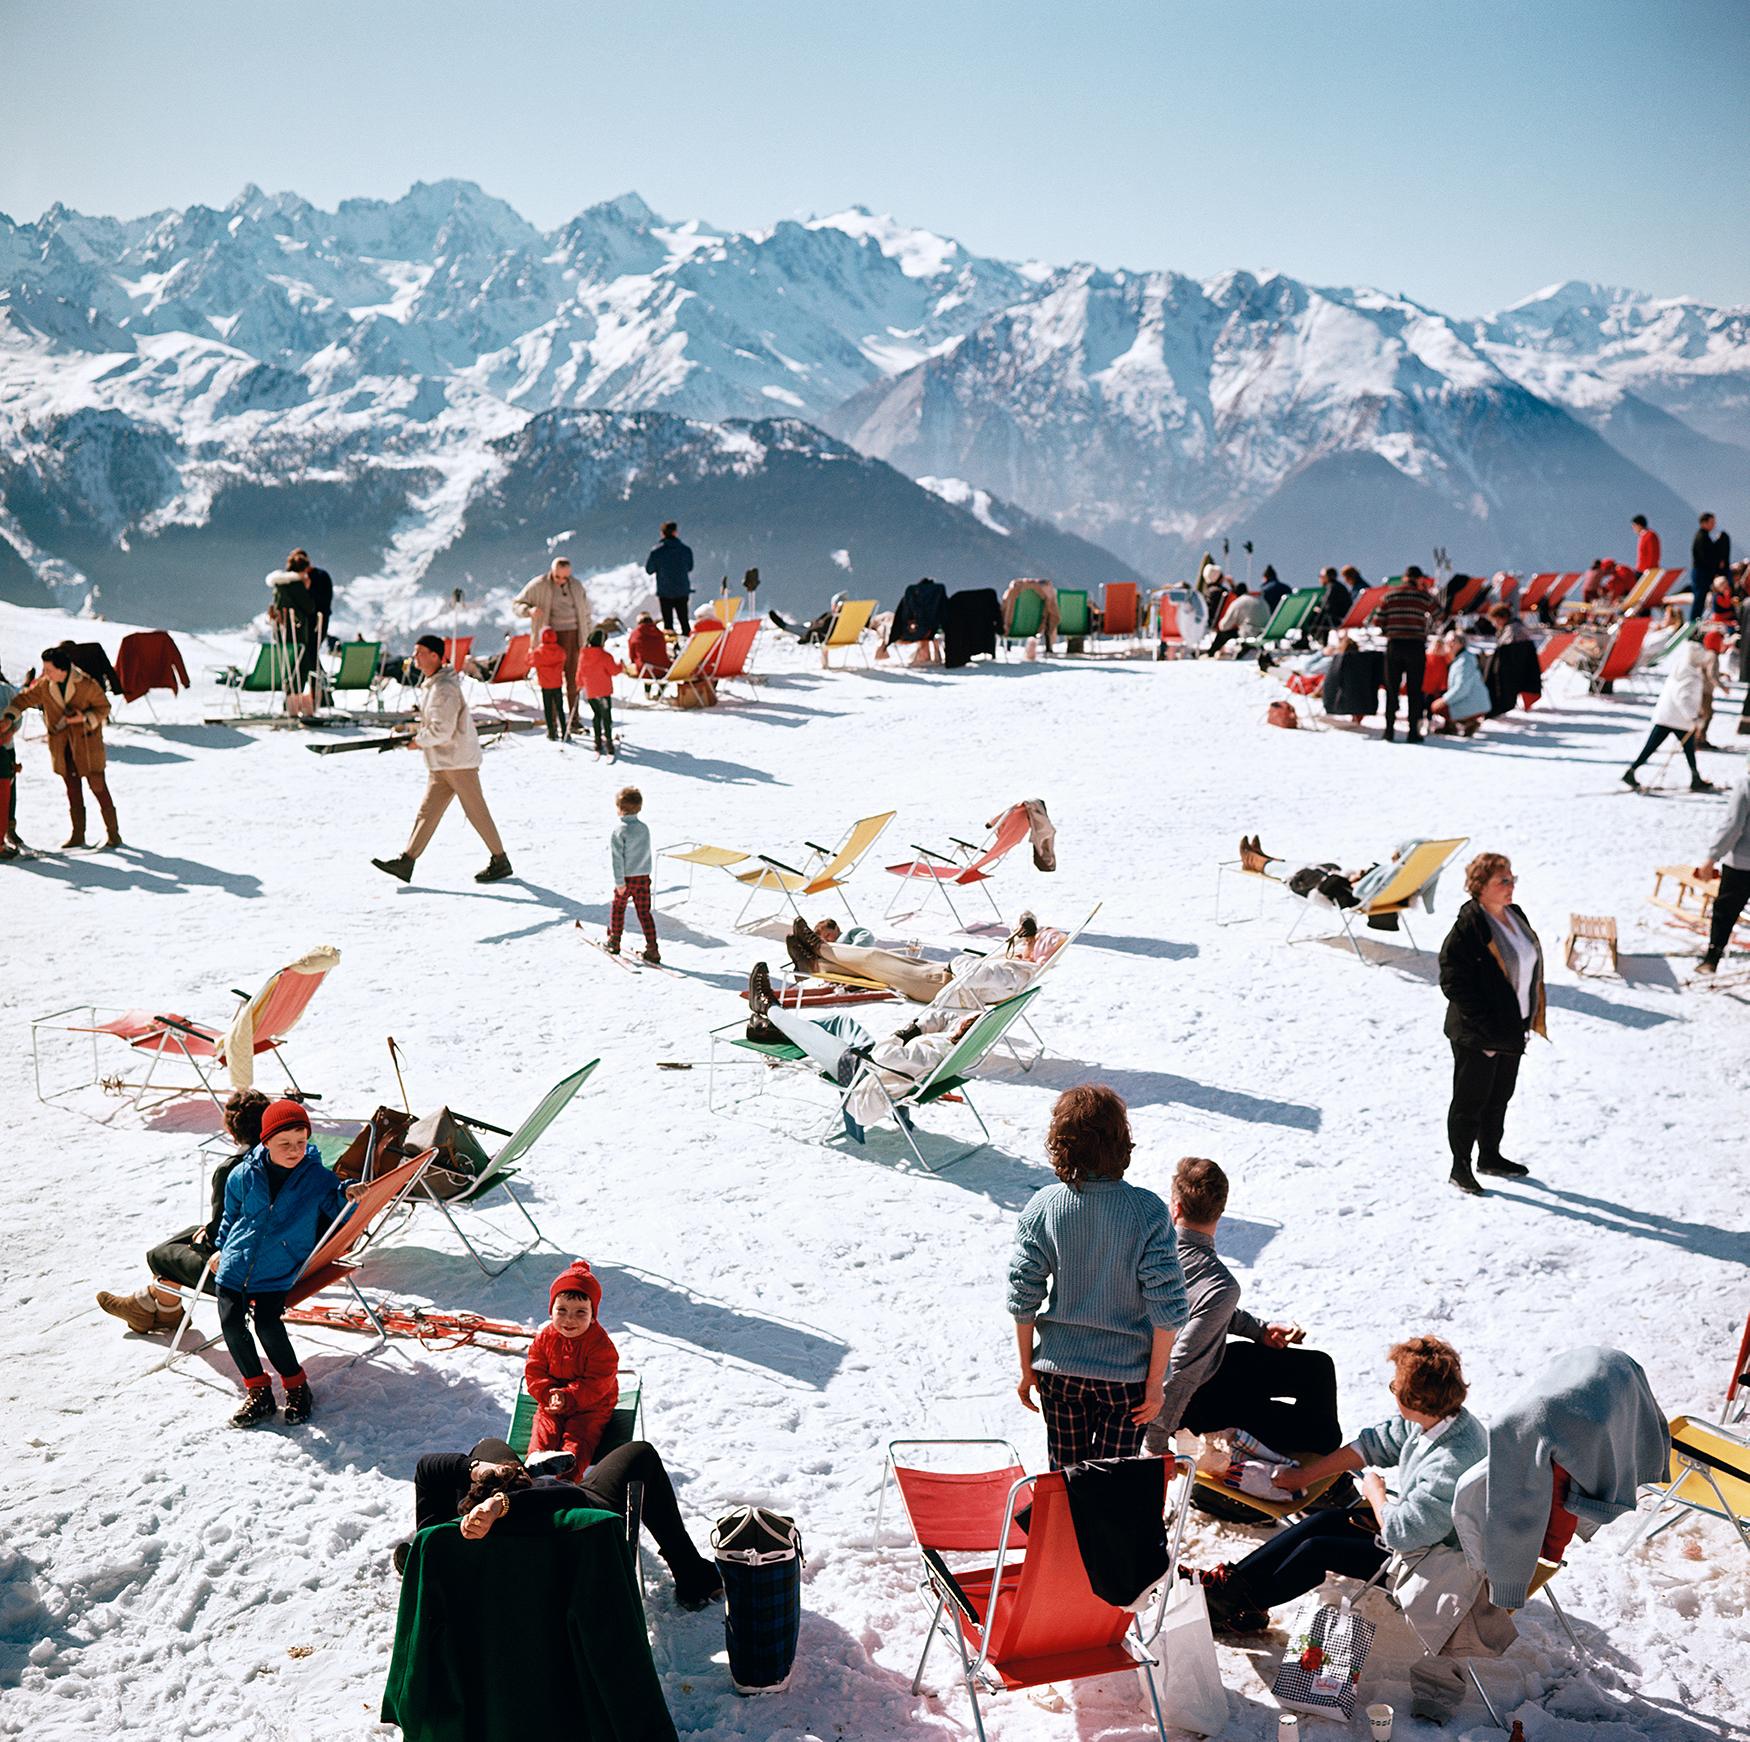 Verbier Vacation
1964
C-Print
Estate signature stamped and hand numbered edition of 150 with certificate of authenticity from the estate.   

Holiday-makers take the sun on a mountain top in Verbier, 1964. (Photo by Slim Aarons/Hulton Archive/Getty